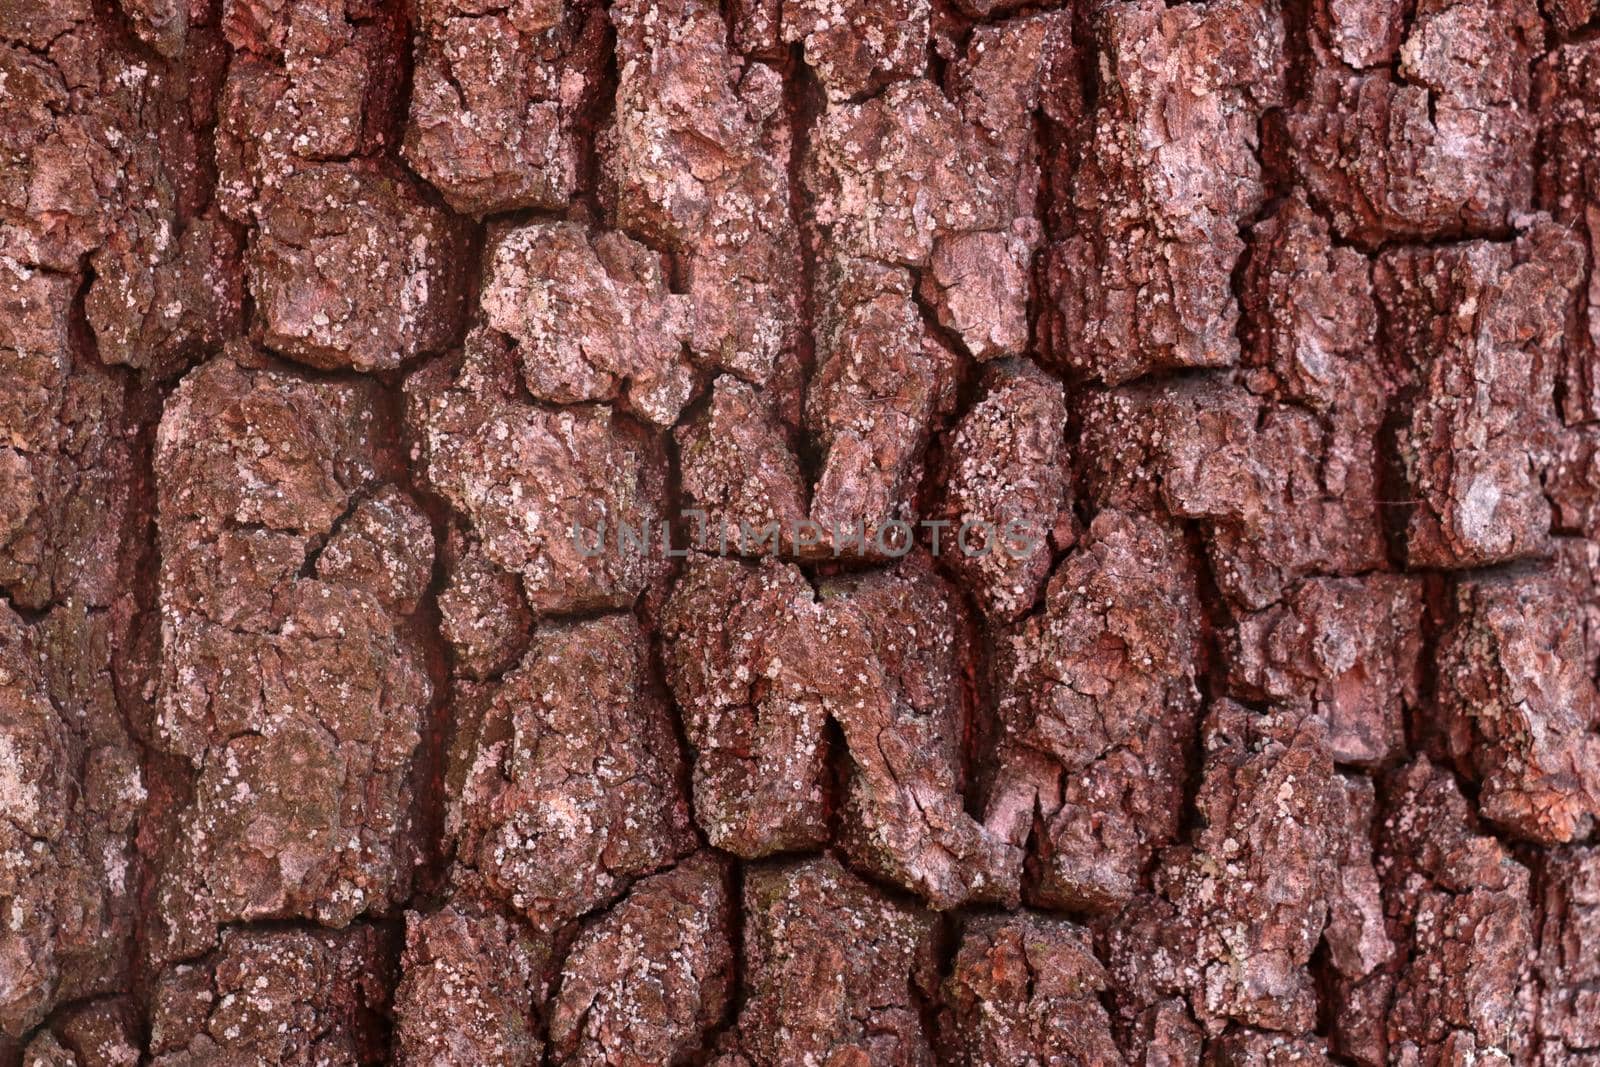 Bright red structured tree bark texture, background